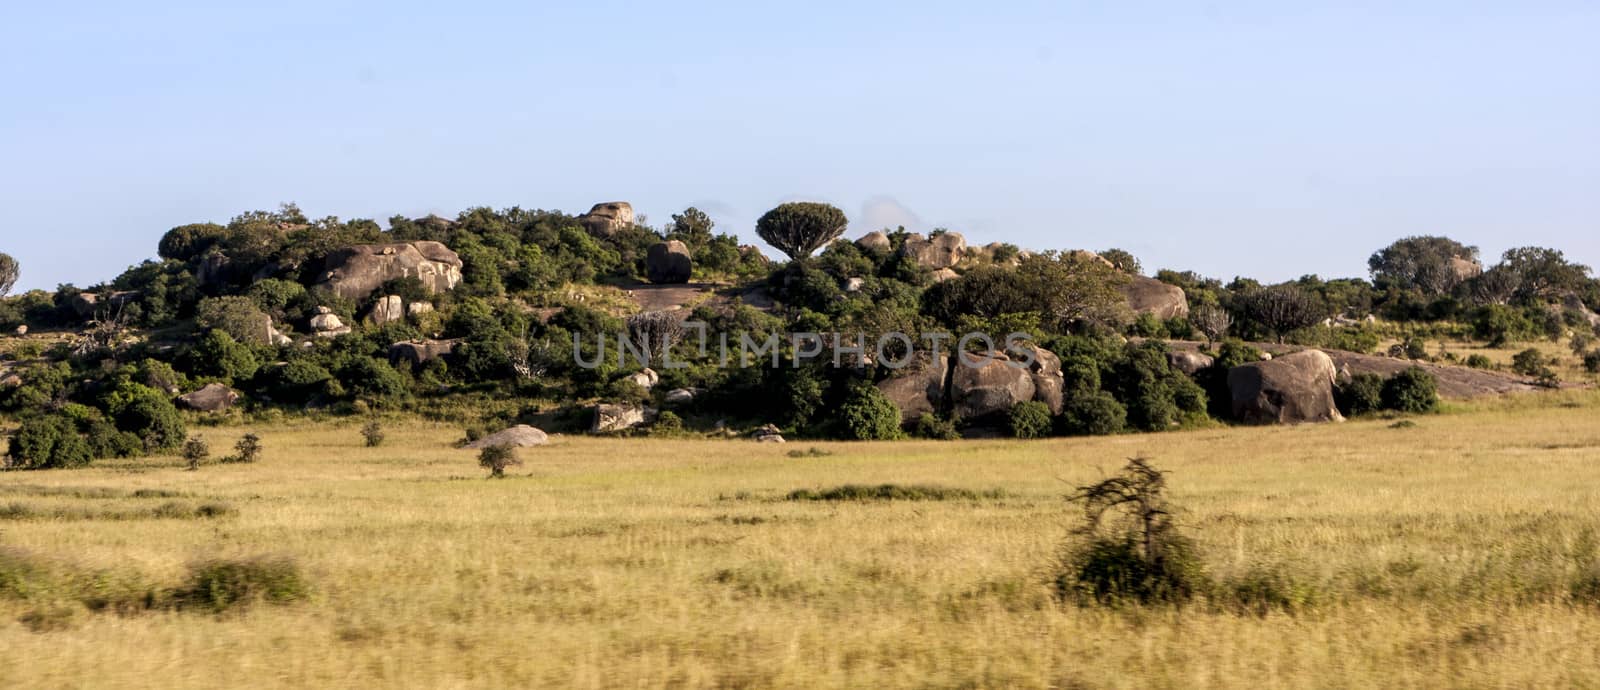 Typical African landscape at Serengeti National park